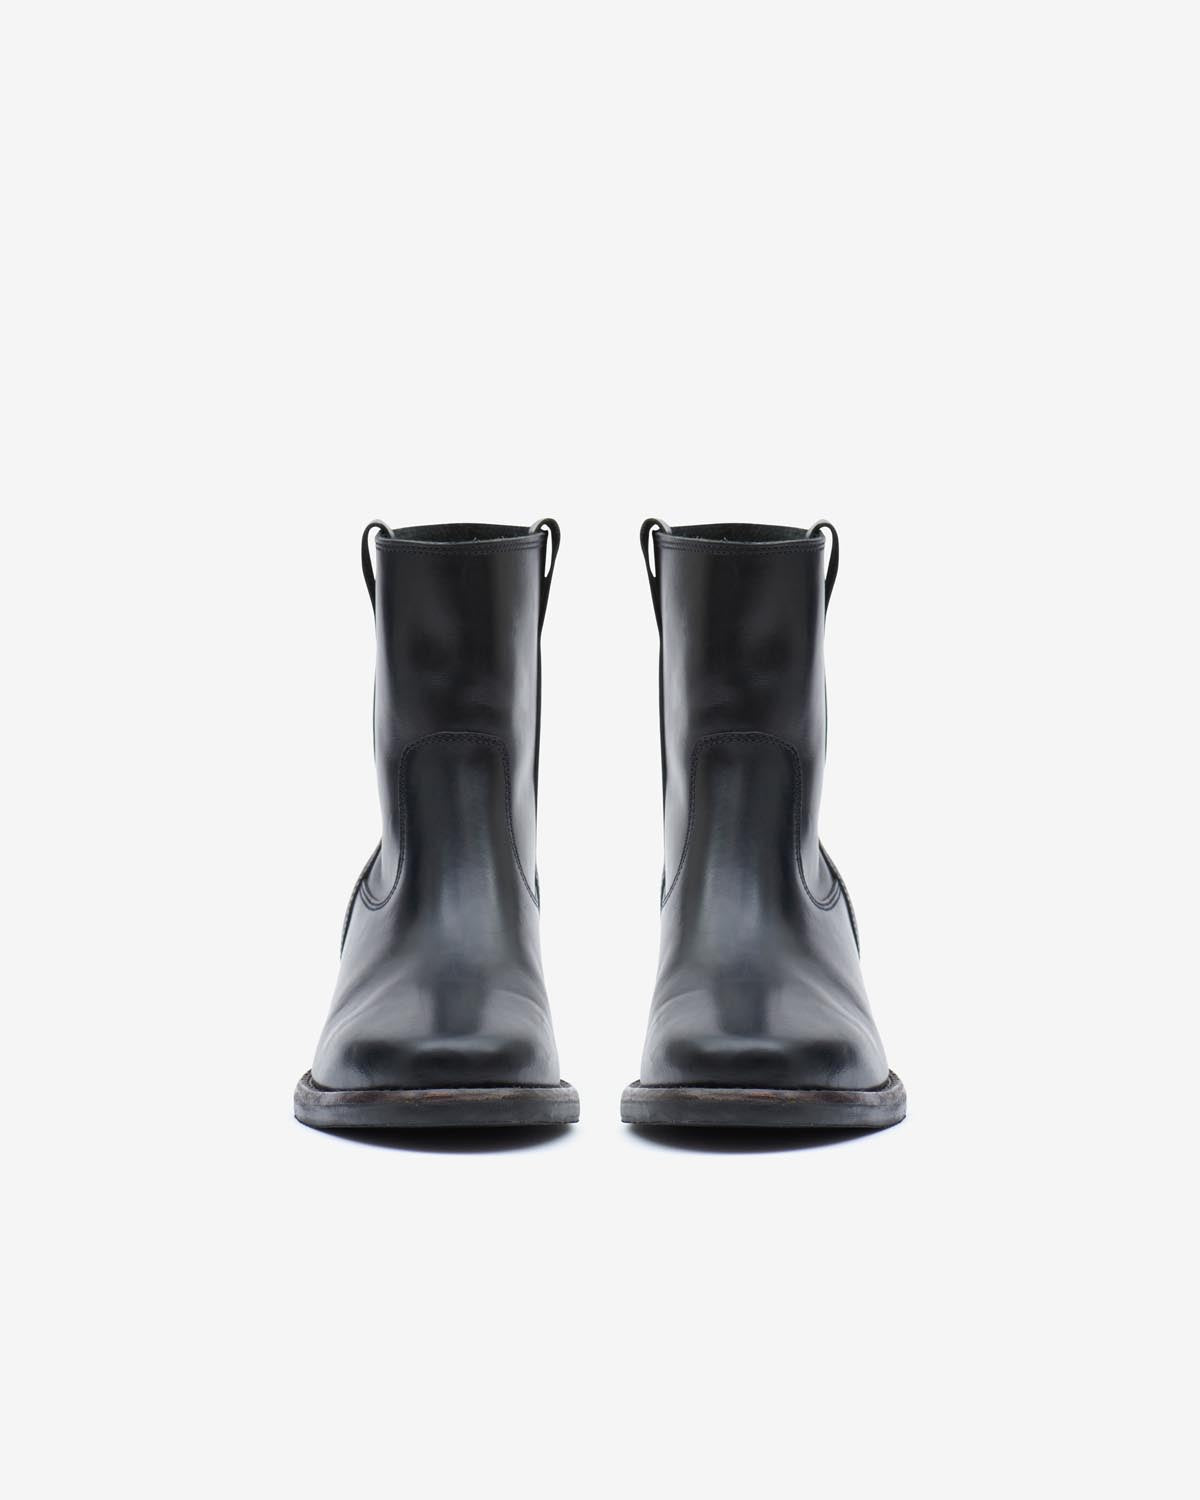 Boots susee Woman Noir 4